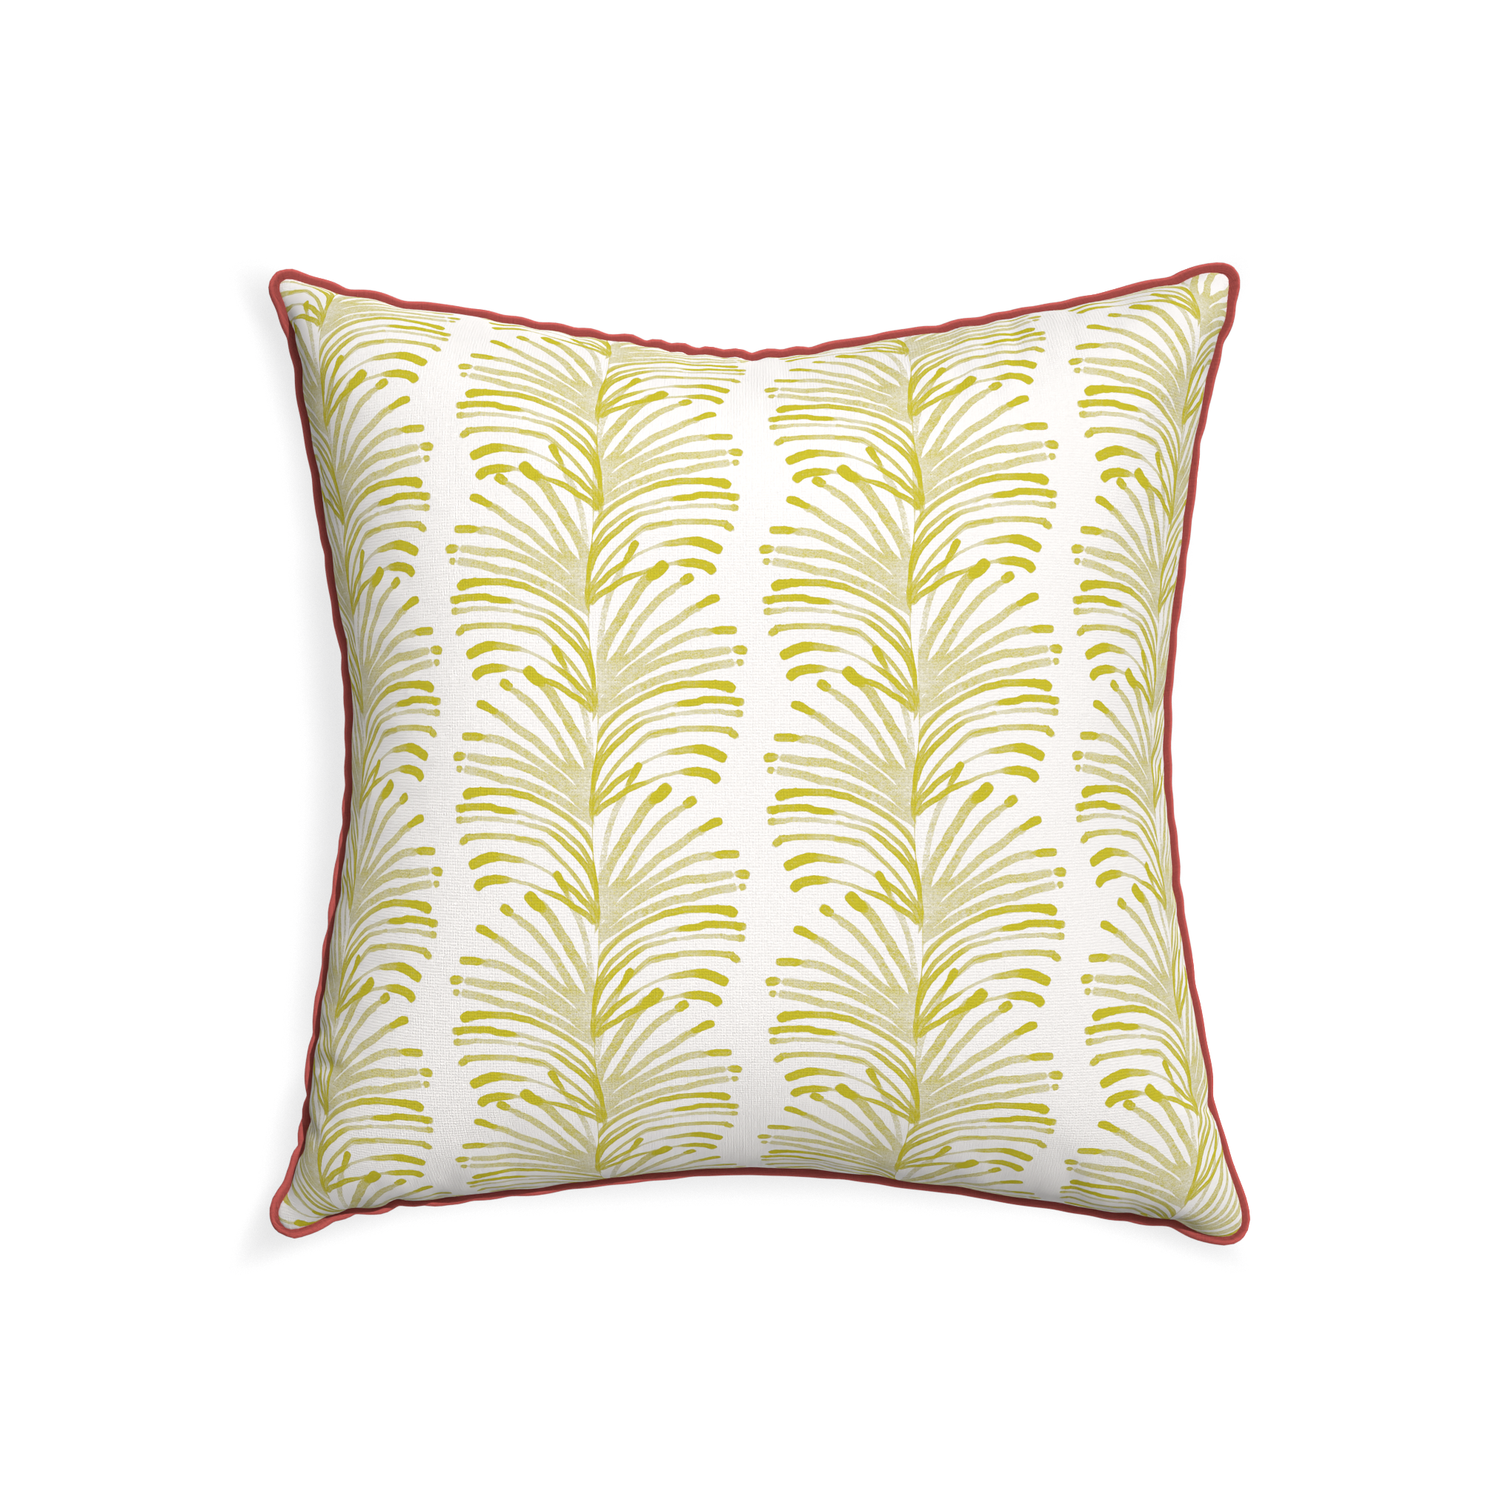 22-square emma chartreuse custom pillow with c piping on white background